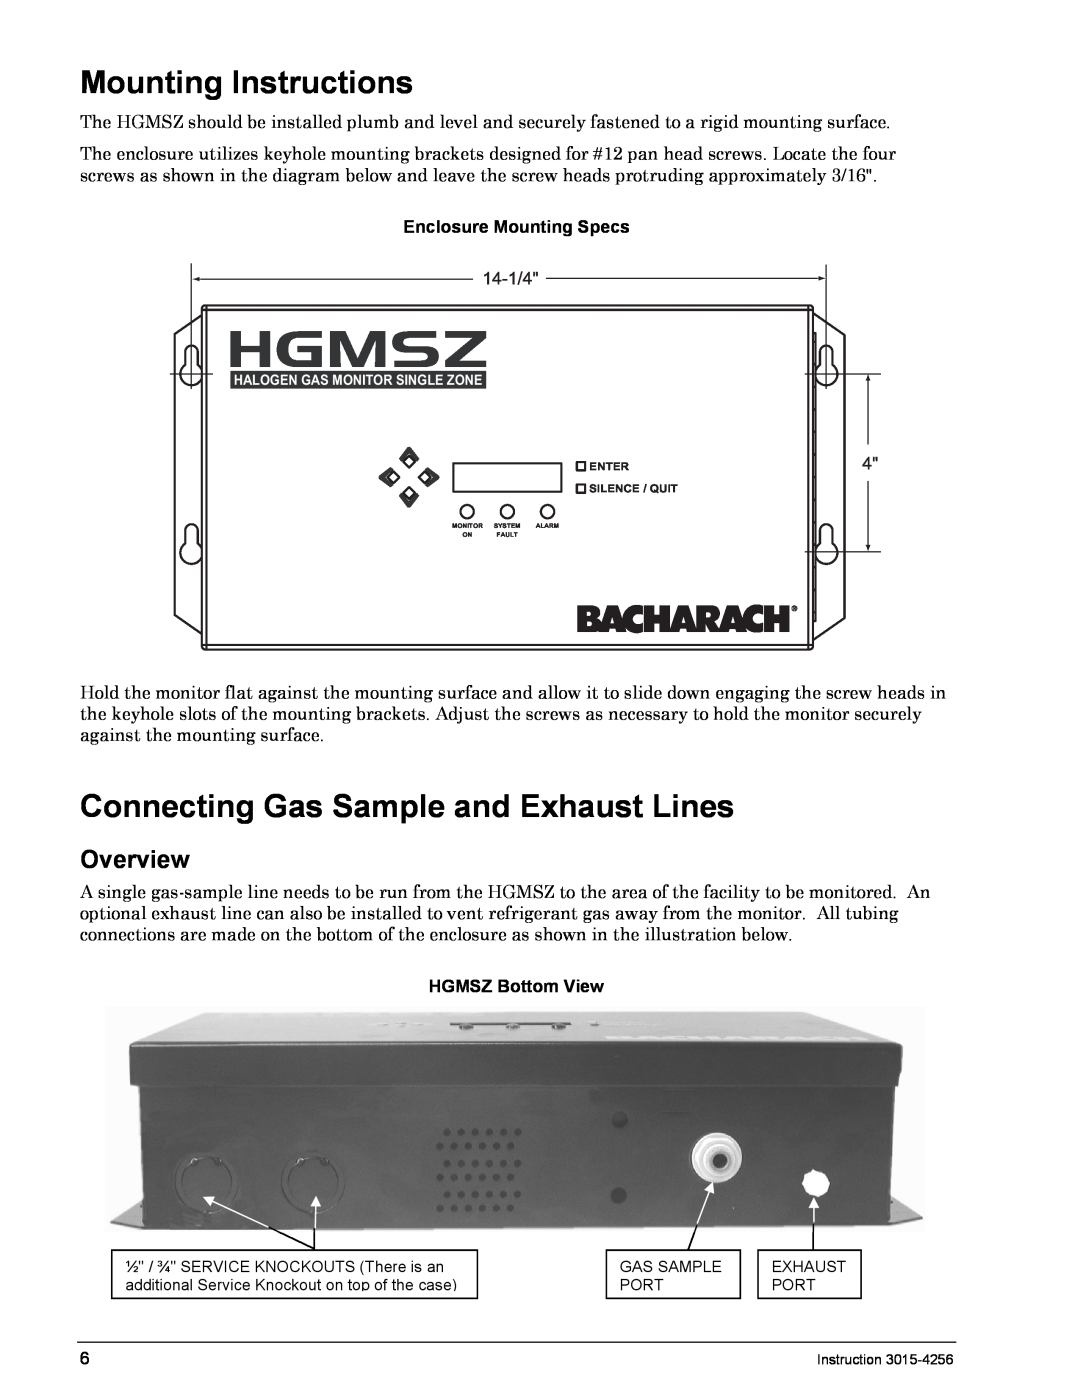 Bacharach 3015-4256 manual Mounting Instructions, Connecting Gas Sample and Exhaust Lines, Hgmsz, Enclosure Mounting Specs 